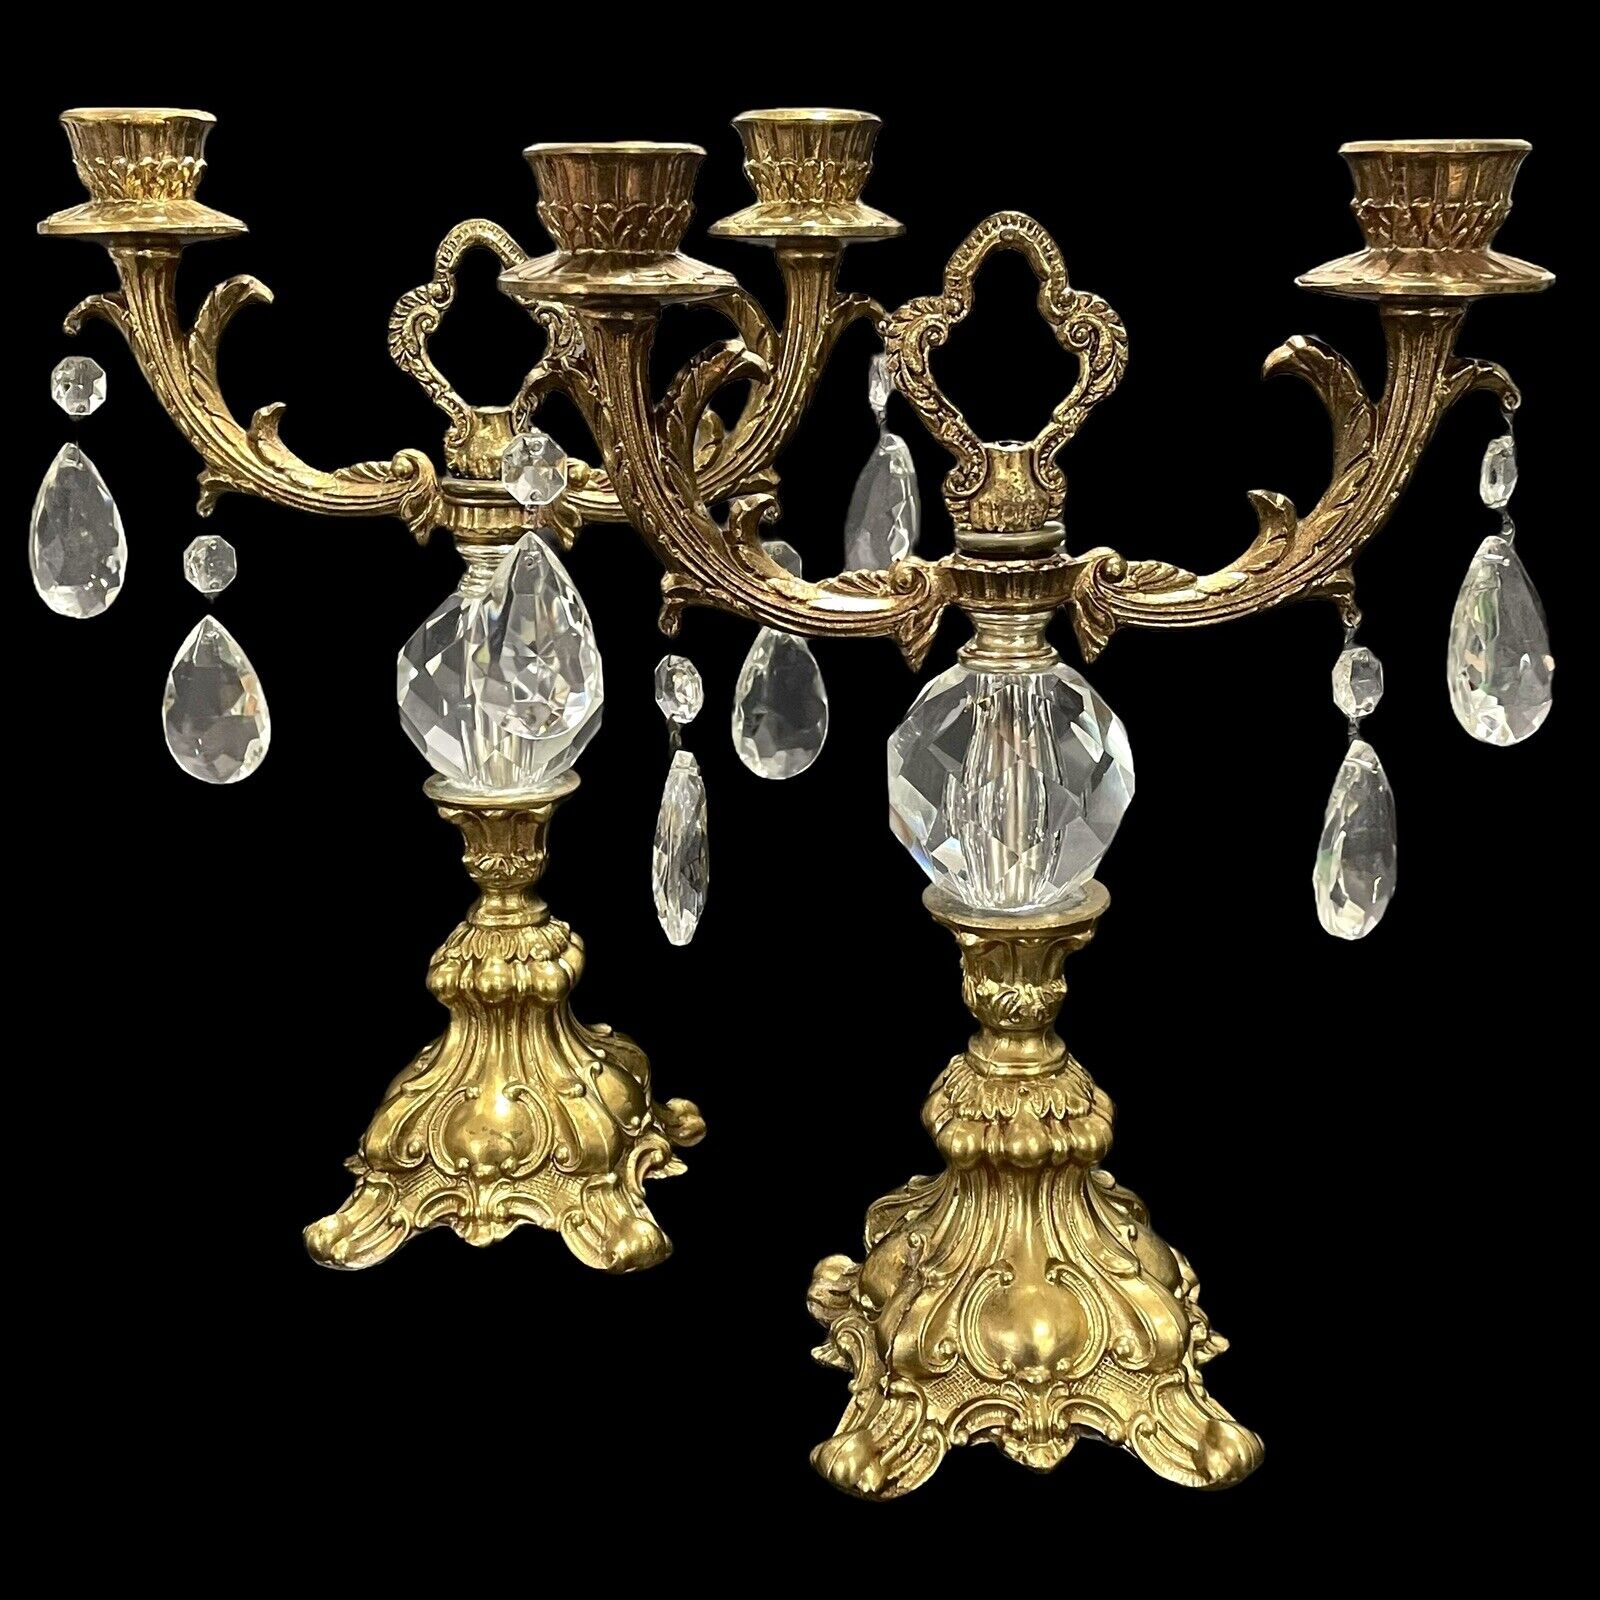 Vintage 1950s Set of 2 Candelabra Rococo Style Chateau 2 Arms Casted Solid Brass